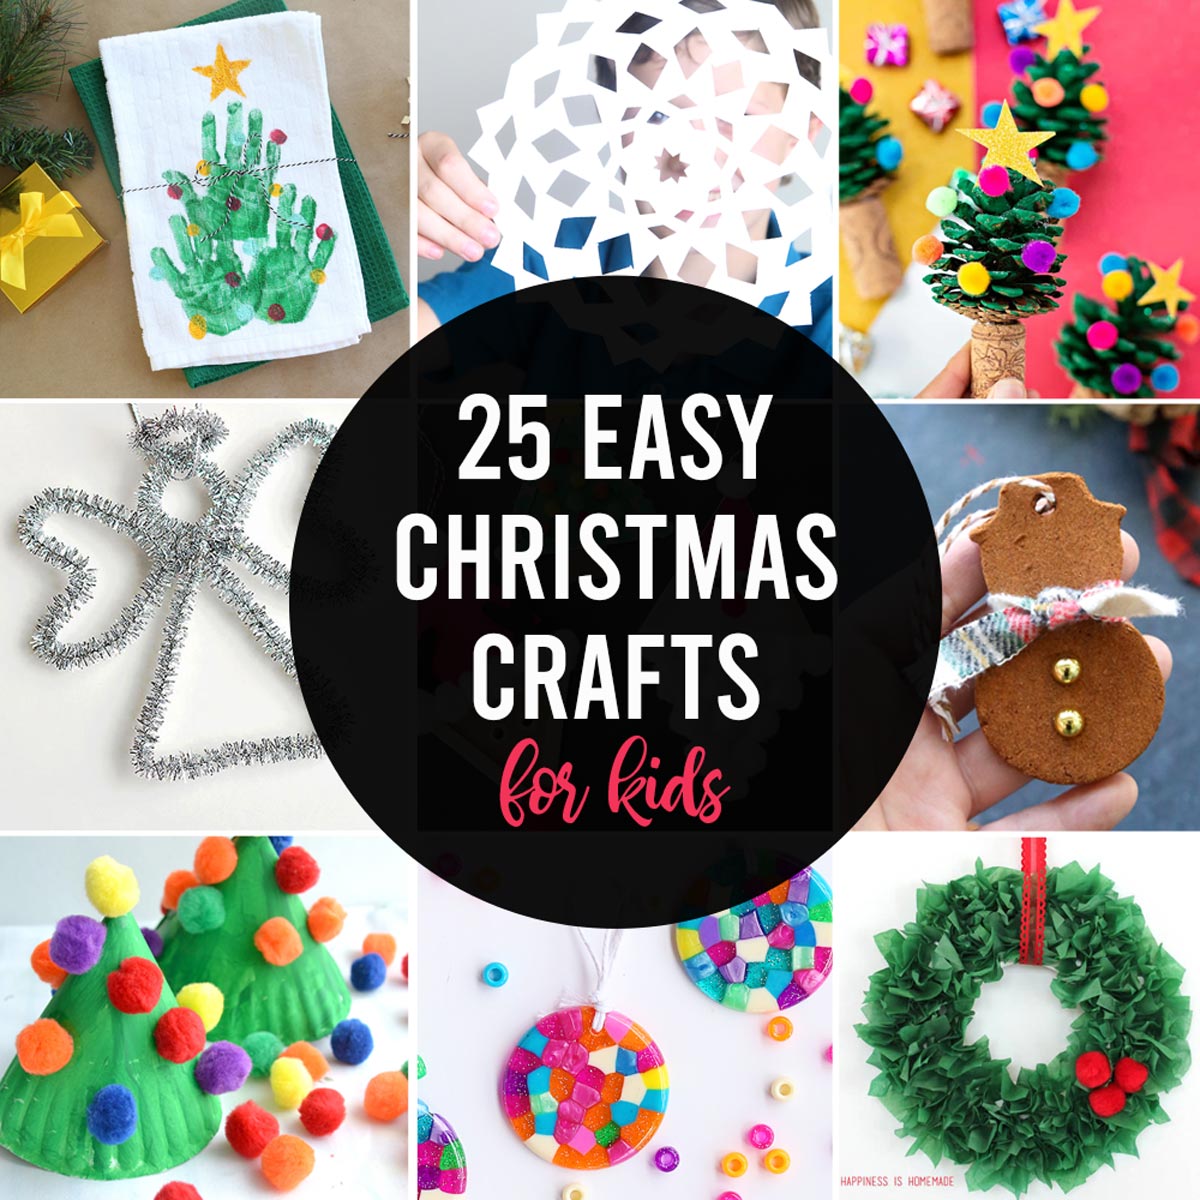 25 Super Easy Christmas Crafts for Kids